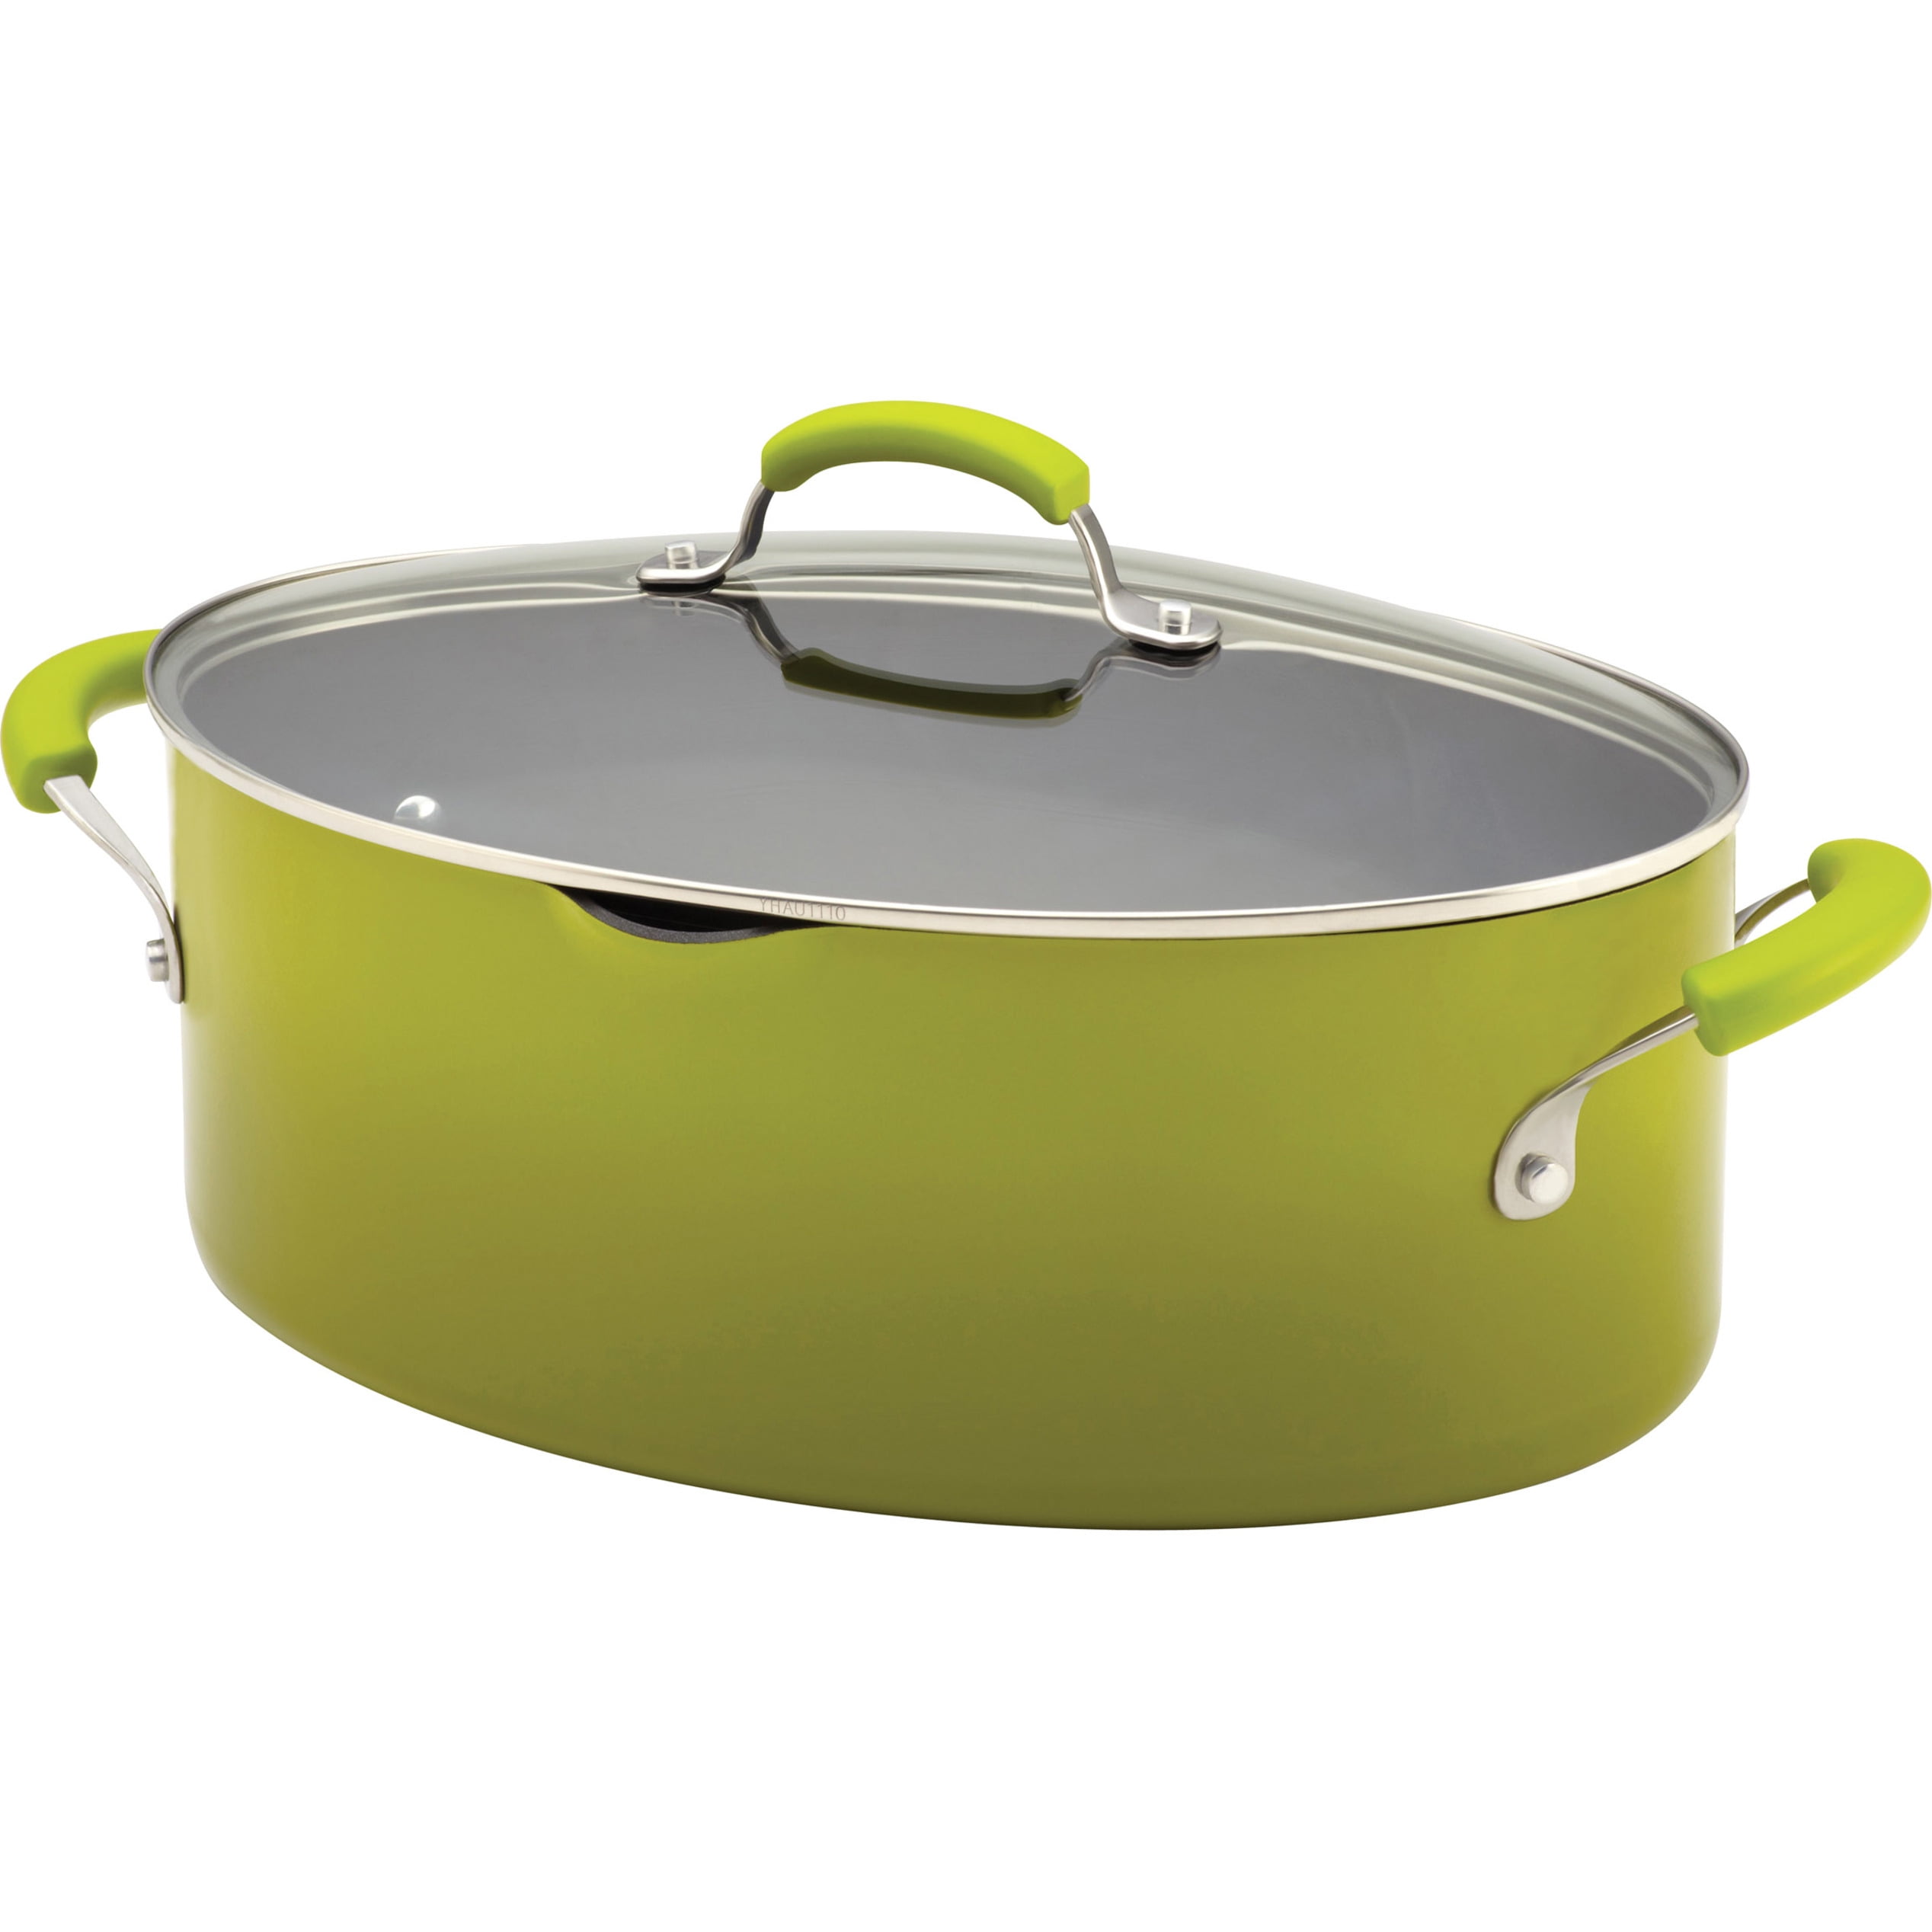 Rachael Ray 8-Quart Covered Oval Pasta Pot with Pour Spout, Green 